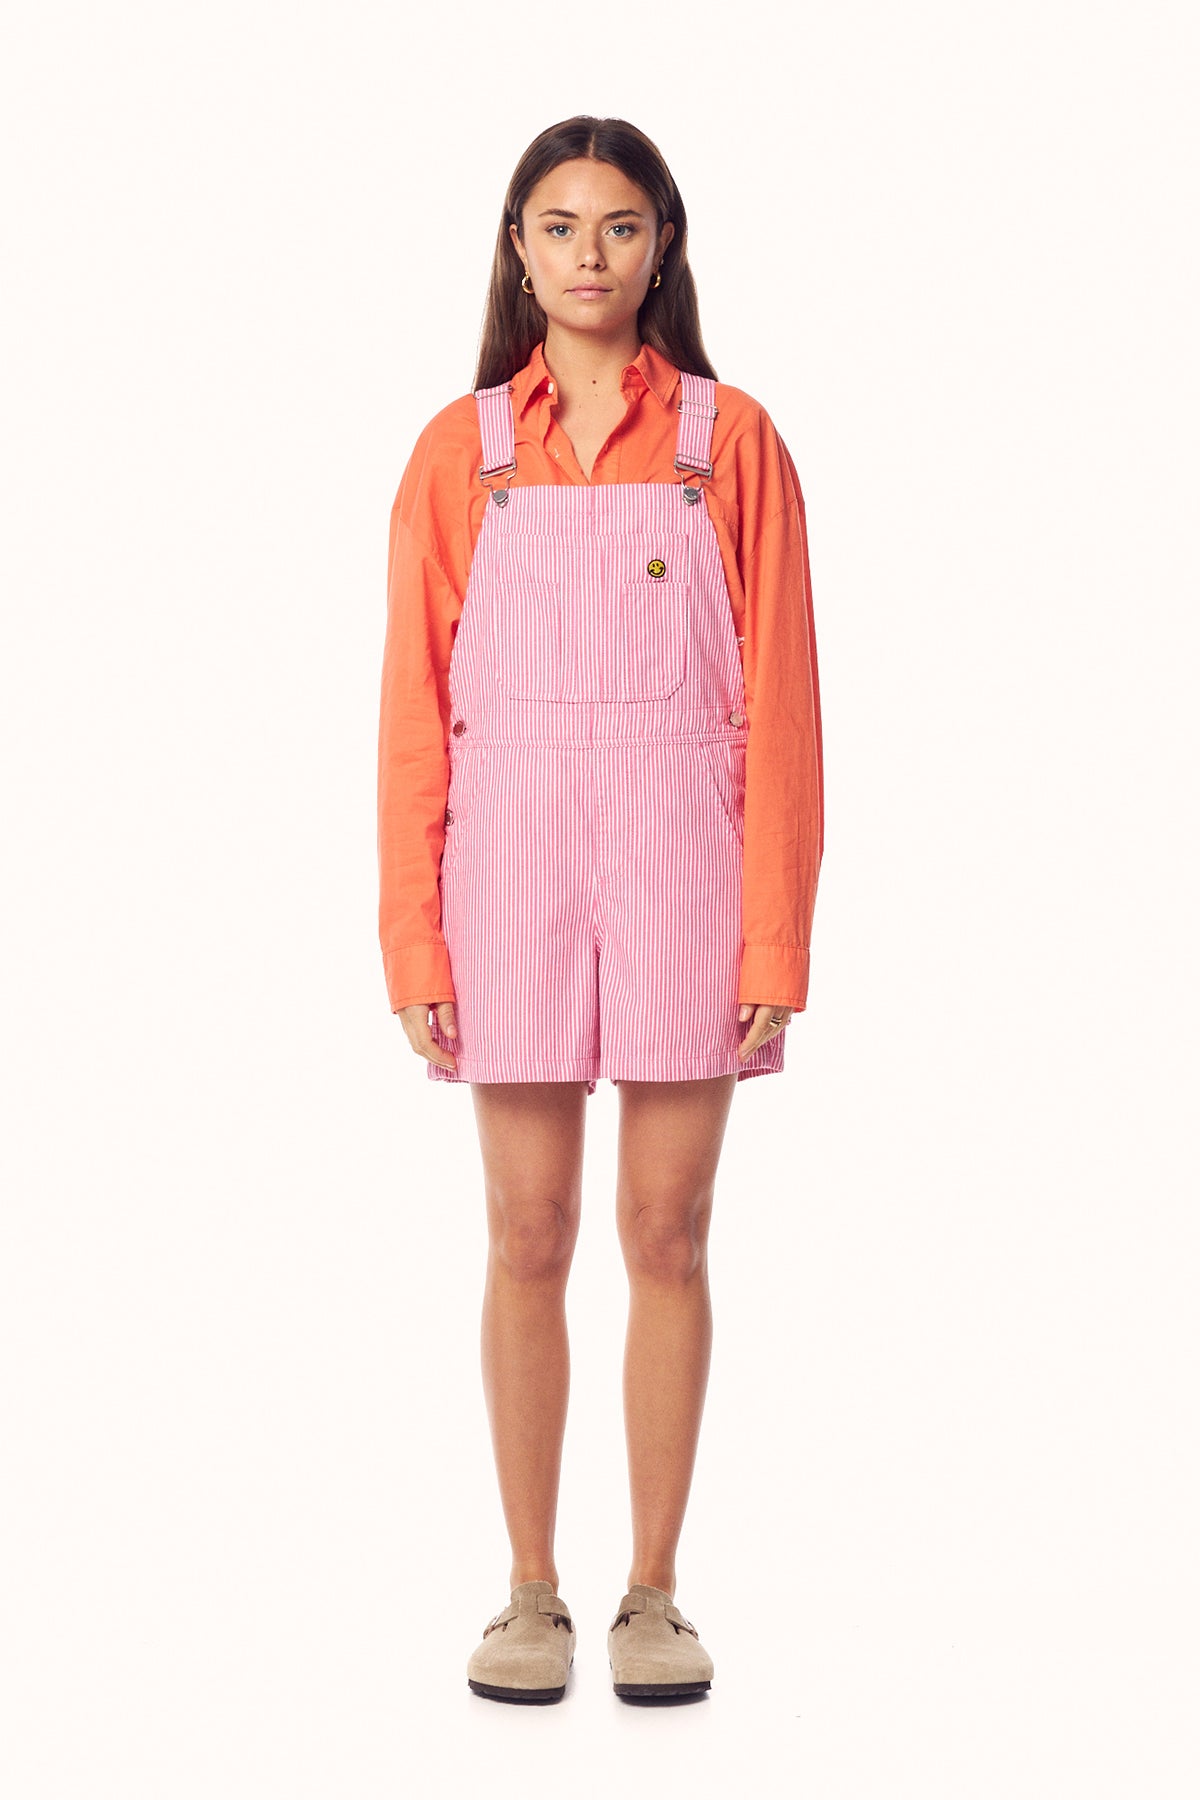 HEAVENLY PEOPLE SHORT OVERALL - CANDY PINK STRIPE